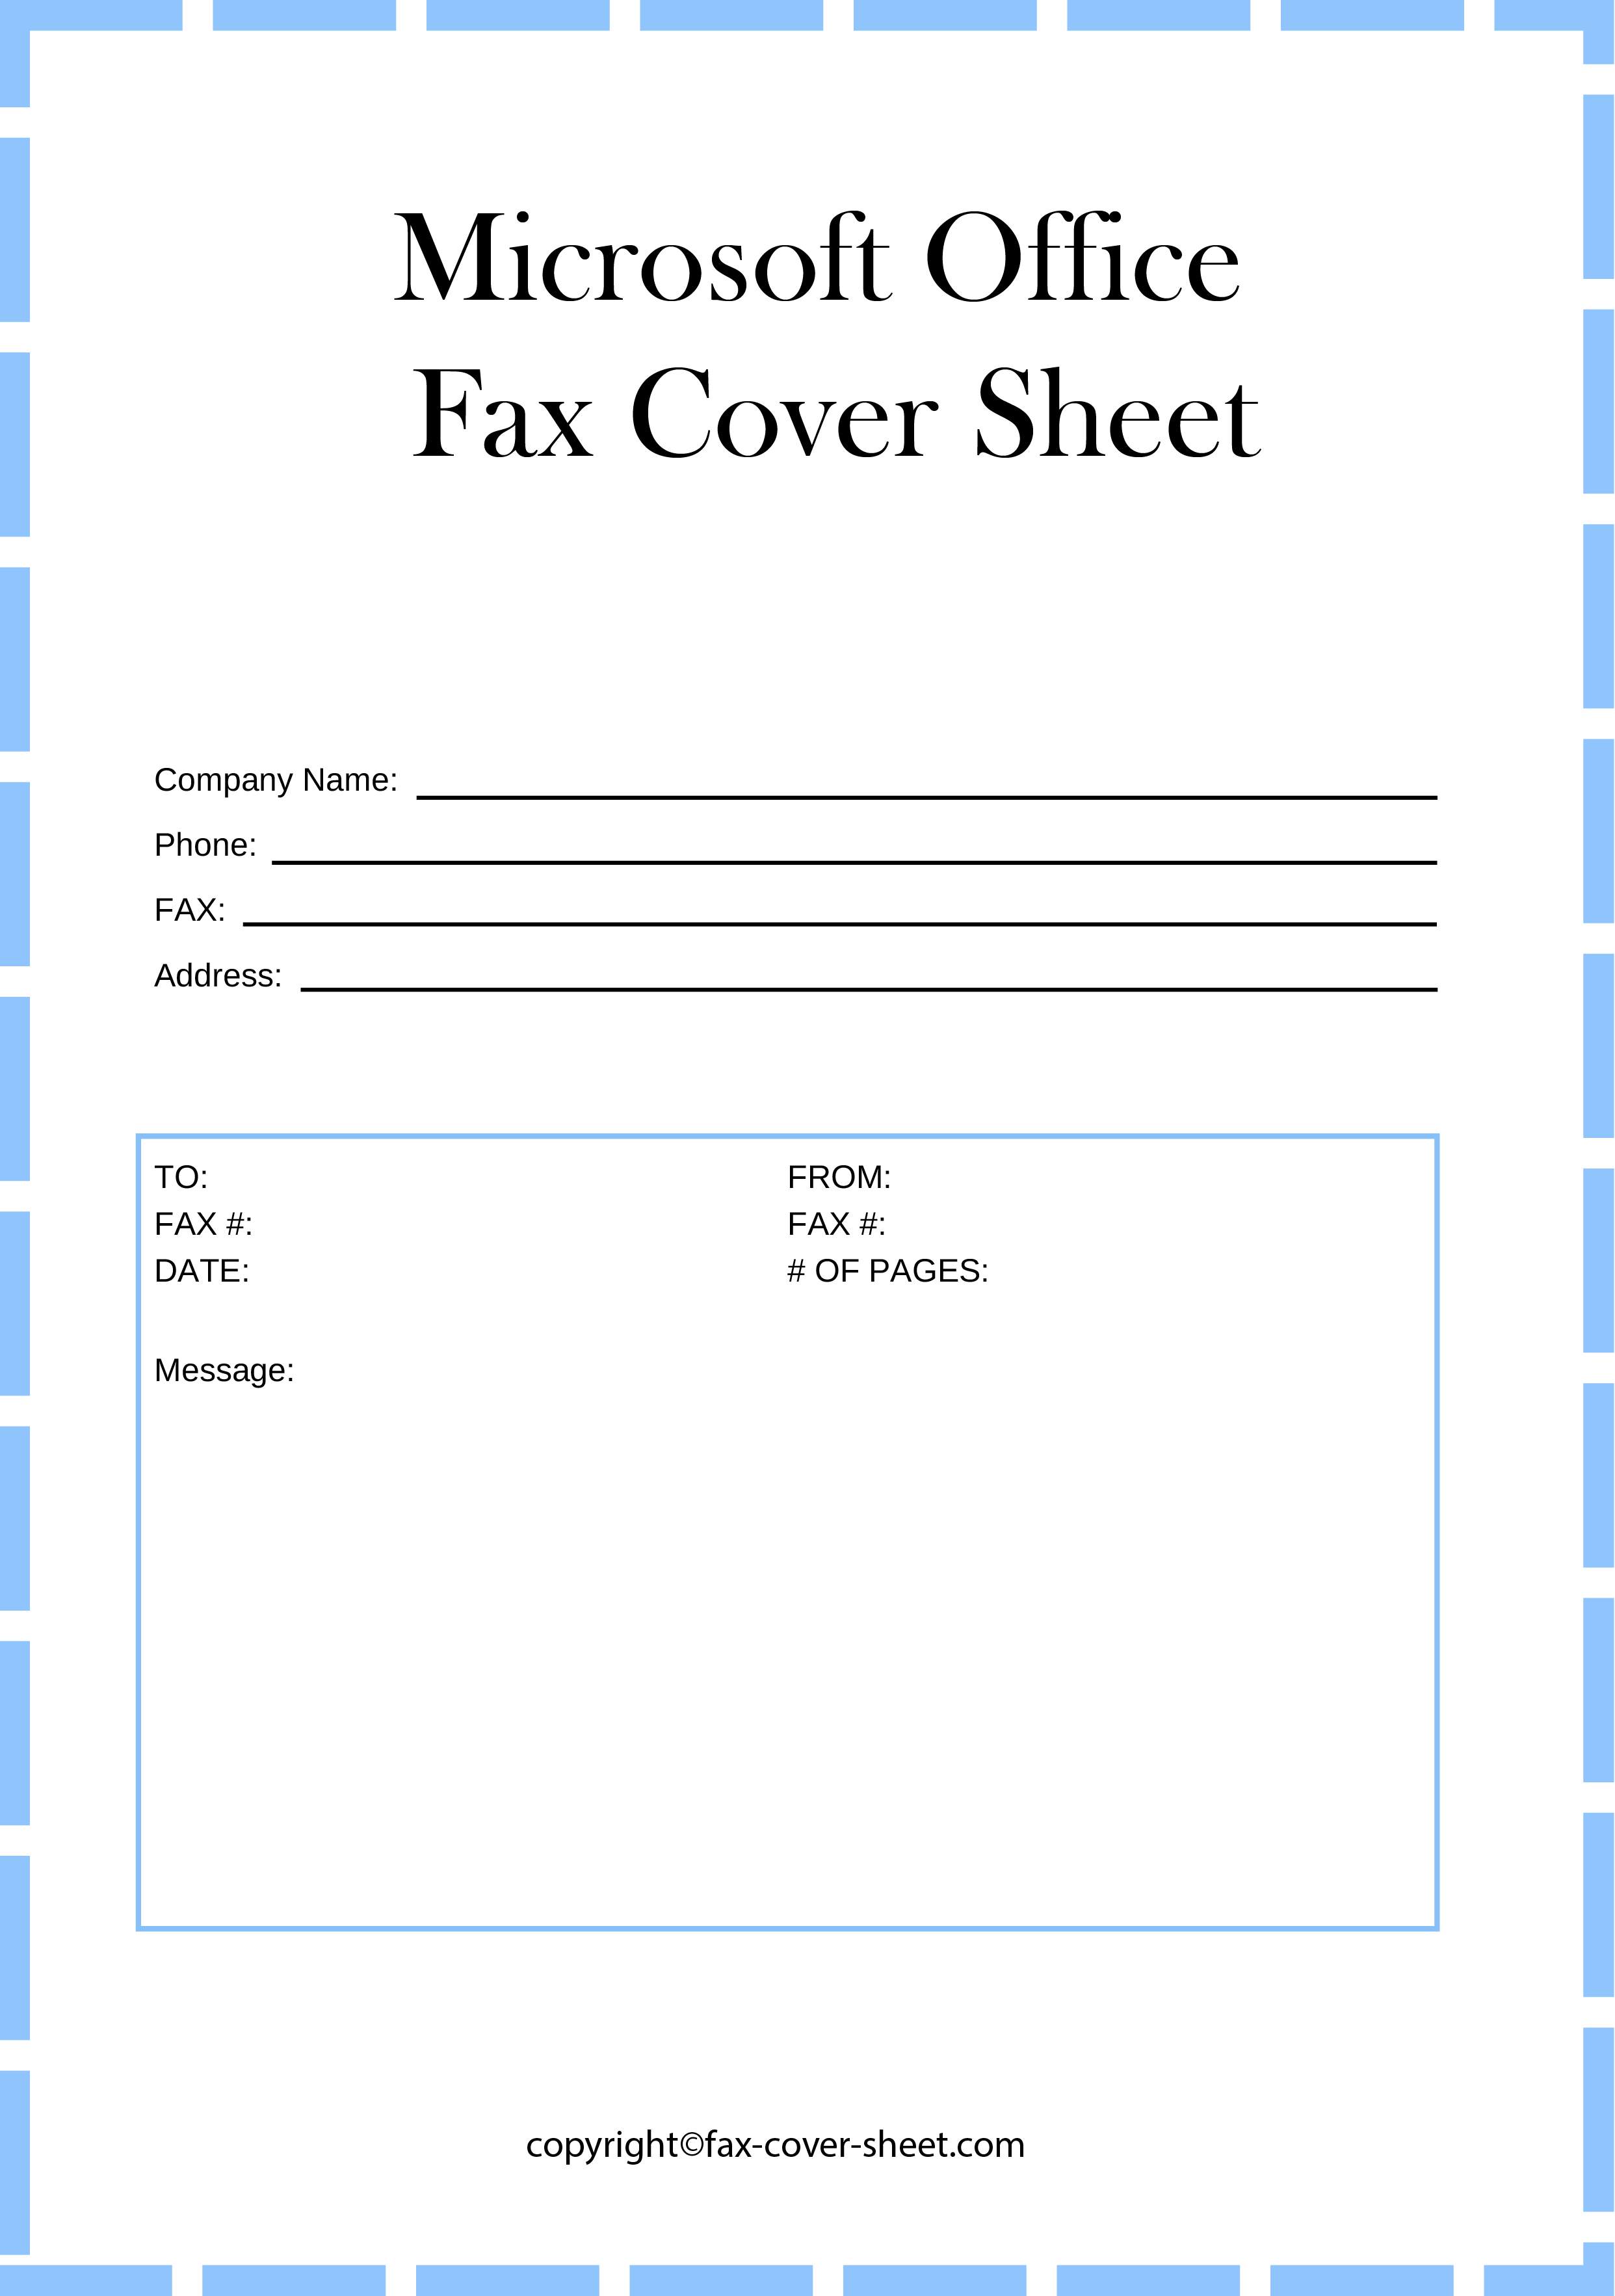 Microsoft Office Fax Cover Sheet